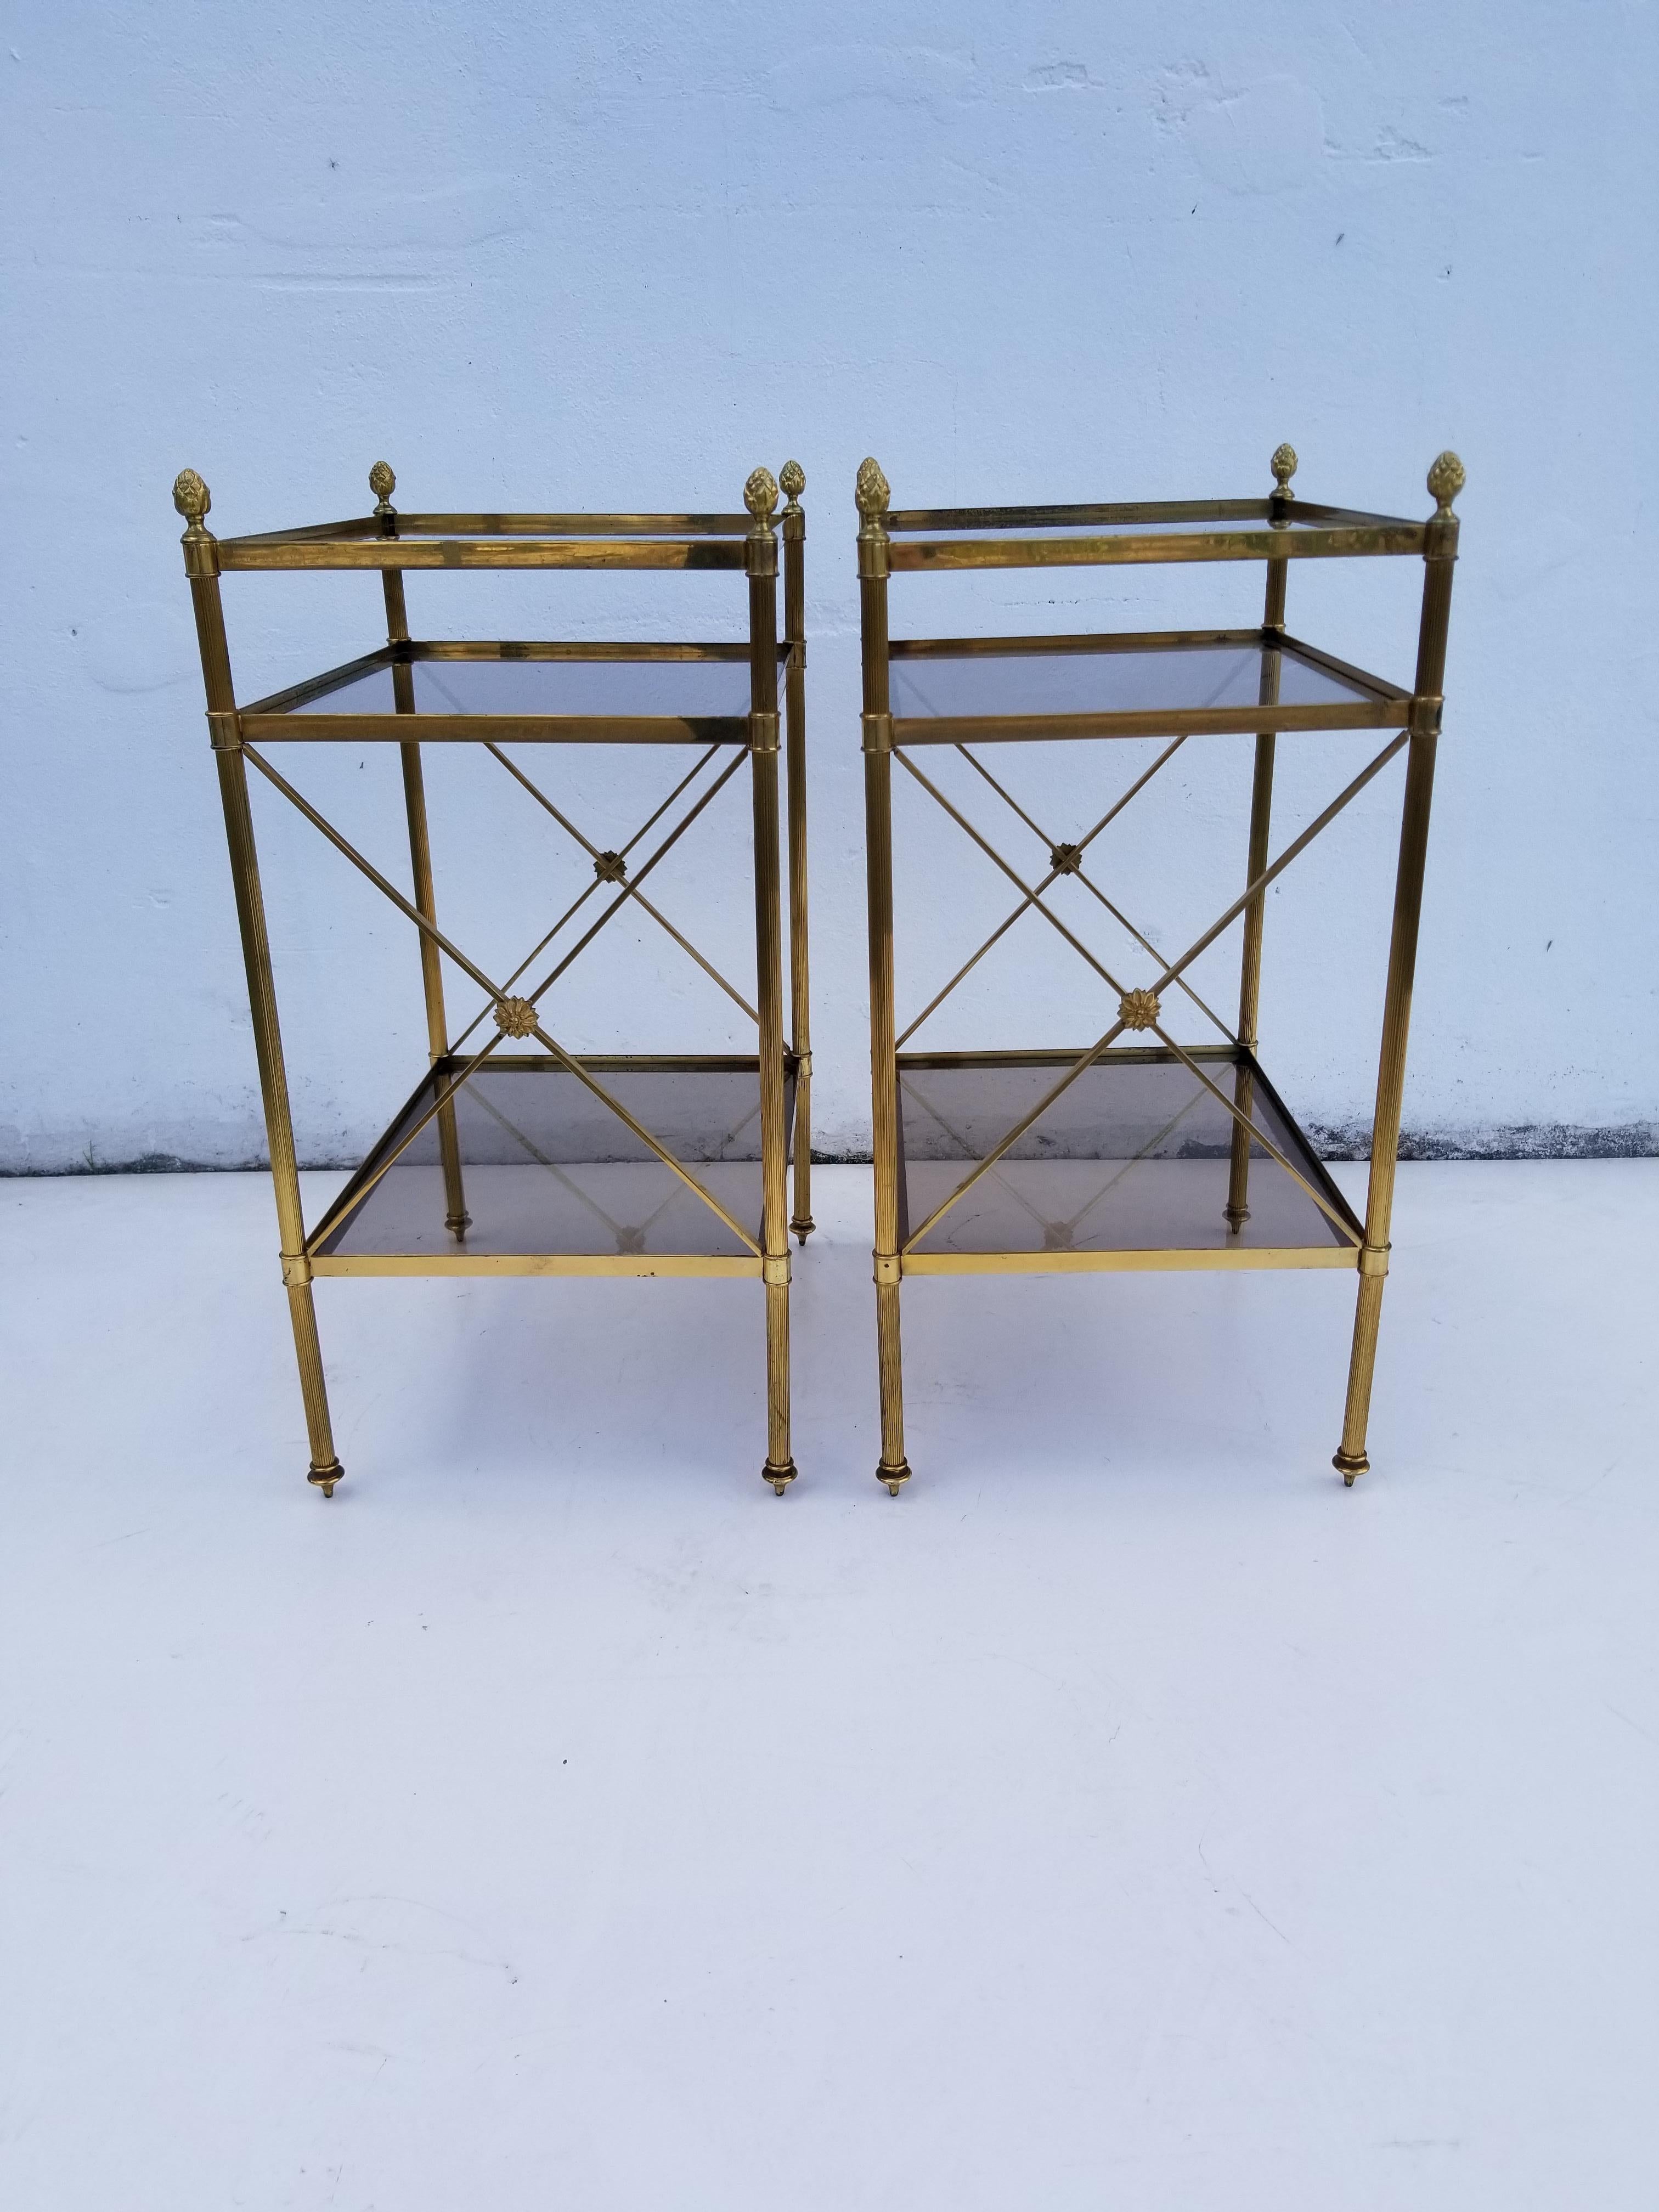 Pair of Maison Baguès 3-tier side tables.
Measure: 1st-tier high 8
2nd-tier high 20
Very good vintage condition.
2 pairs available, 4 tables total.